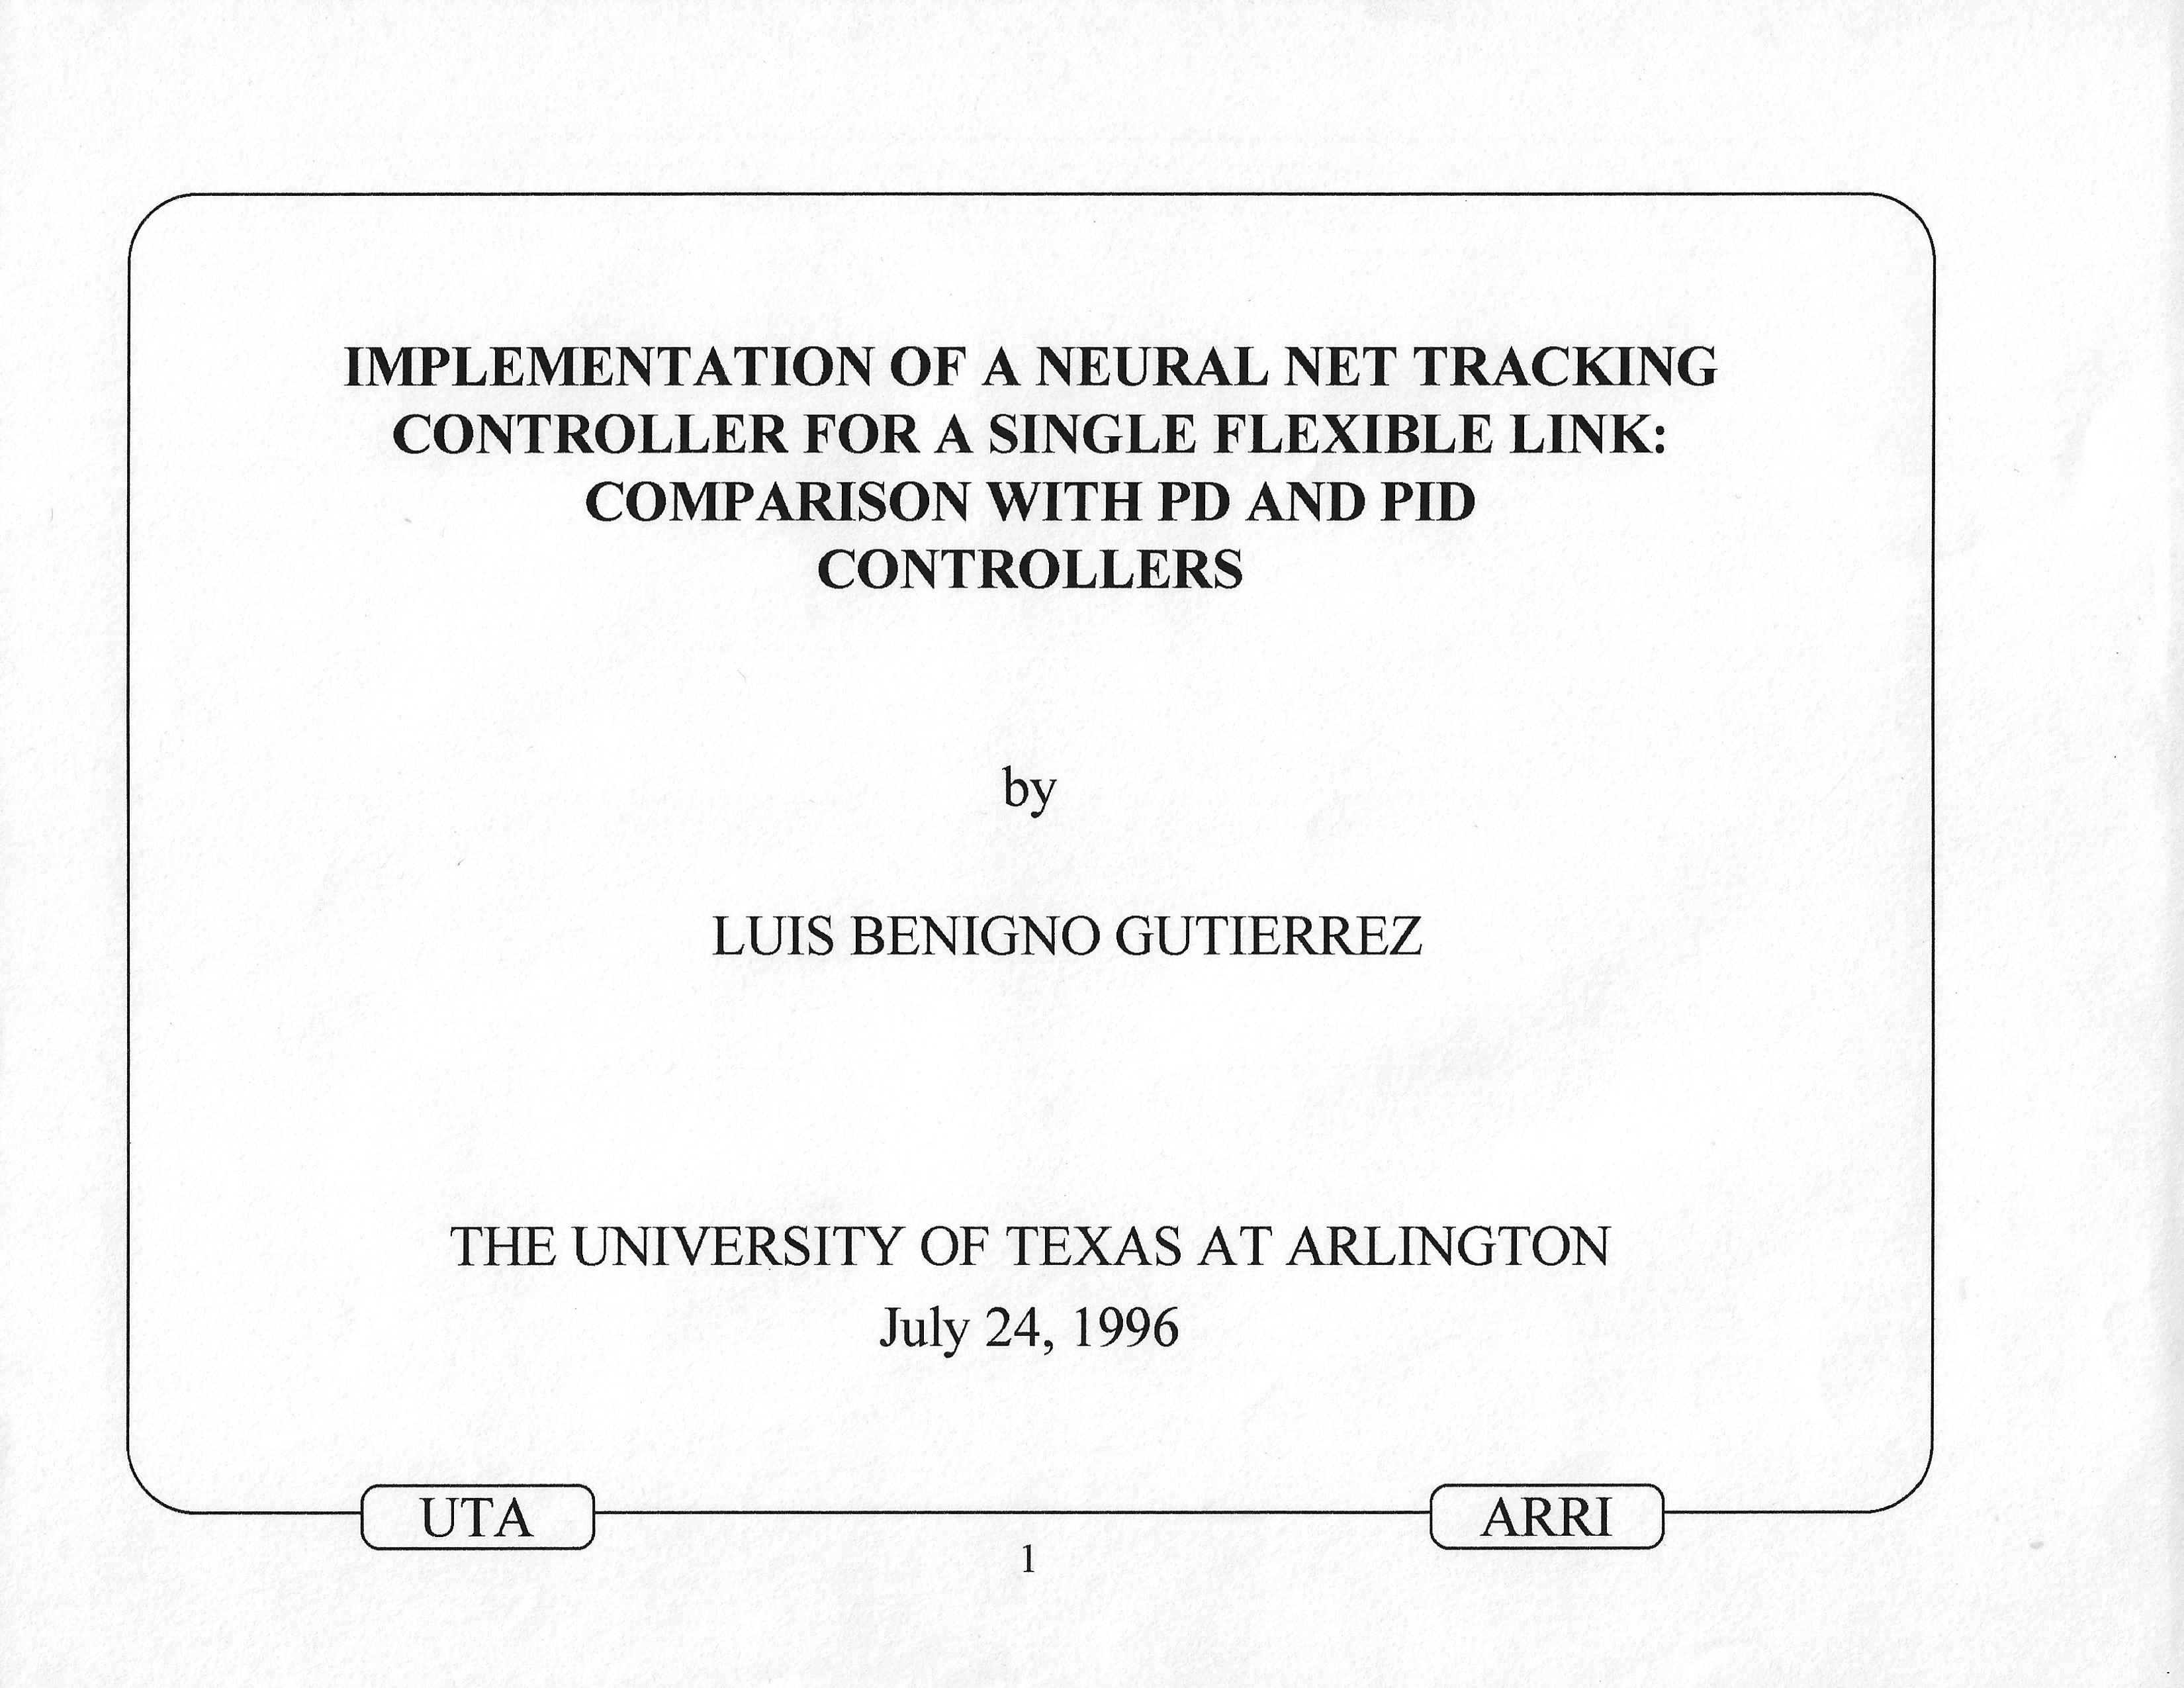 960724_Gutierrez_1996_Implementation_of_a_Neural_Net_Tracking_Controller_for_a_Single_Flexible_Link_Comparison_with_PD_and_PID_controllers_presentation_00